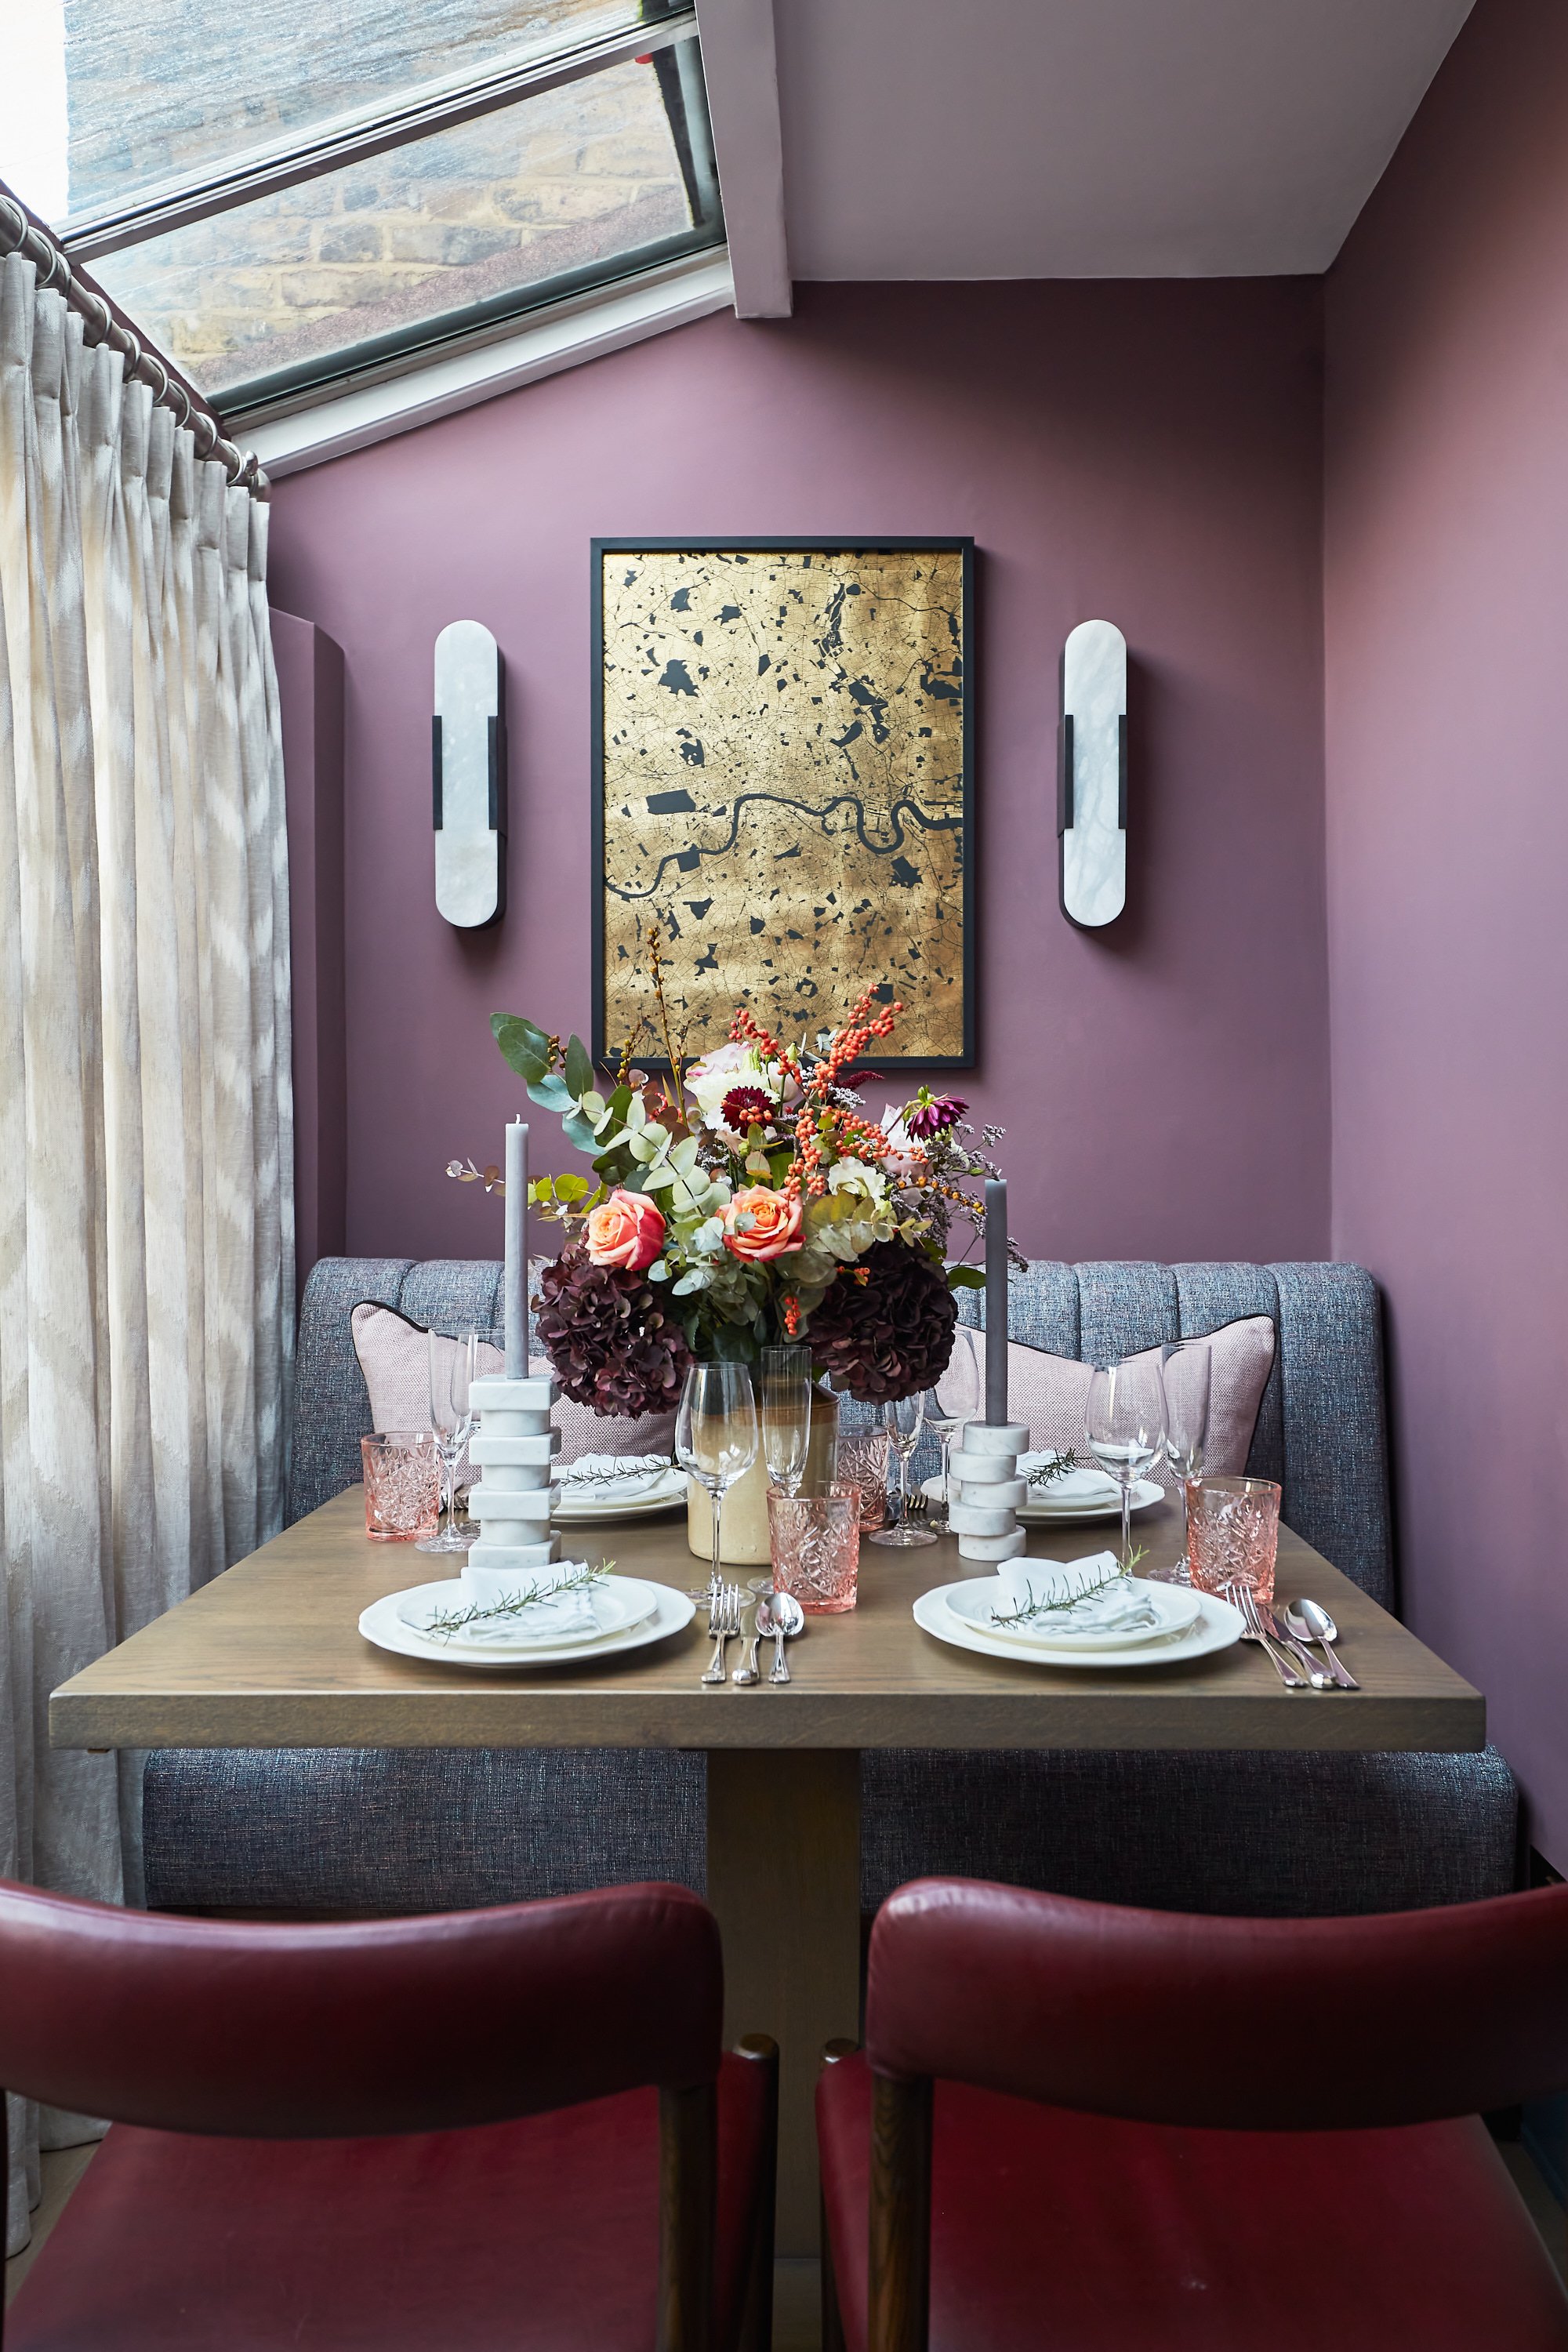 013 DINING SNUG WANDSWORTH HOUSE BY HENRY PRIDEAUX.jpg